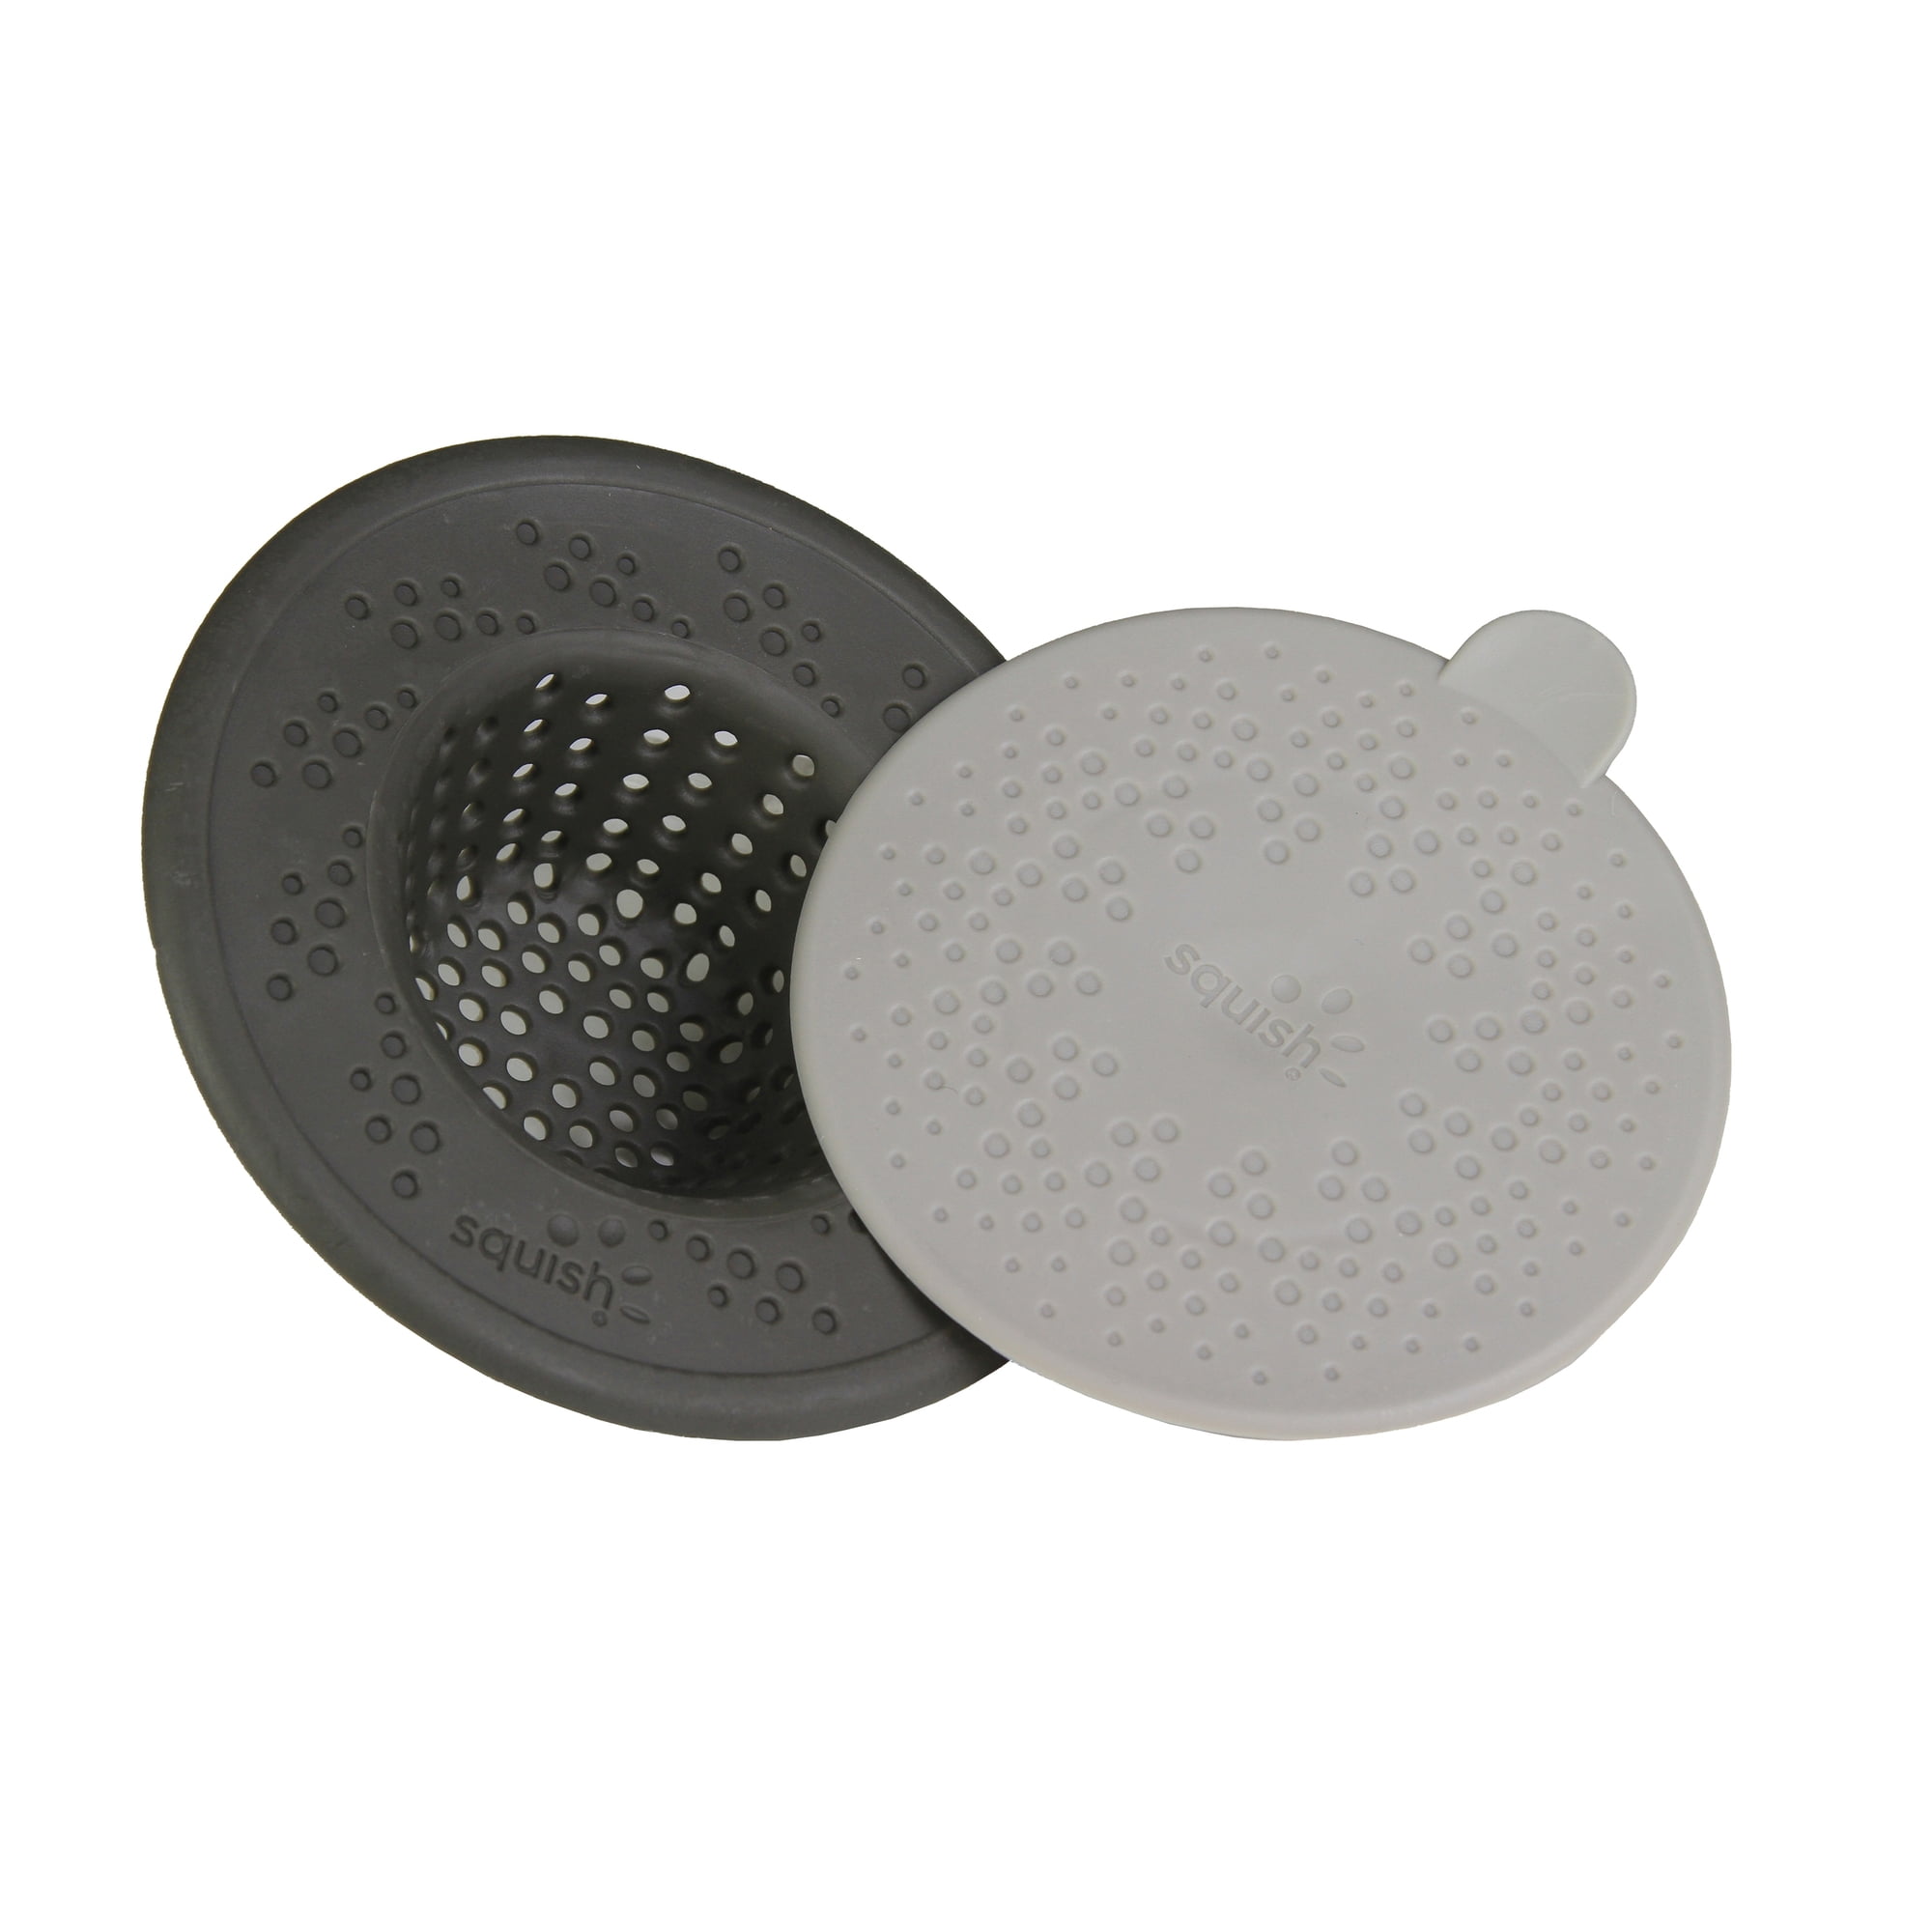 NEW Household Trends Silicone Sink Strainer Basket  Silicone & Stainless Steel 